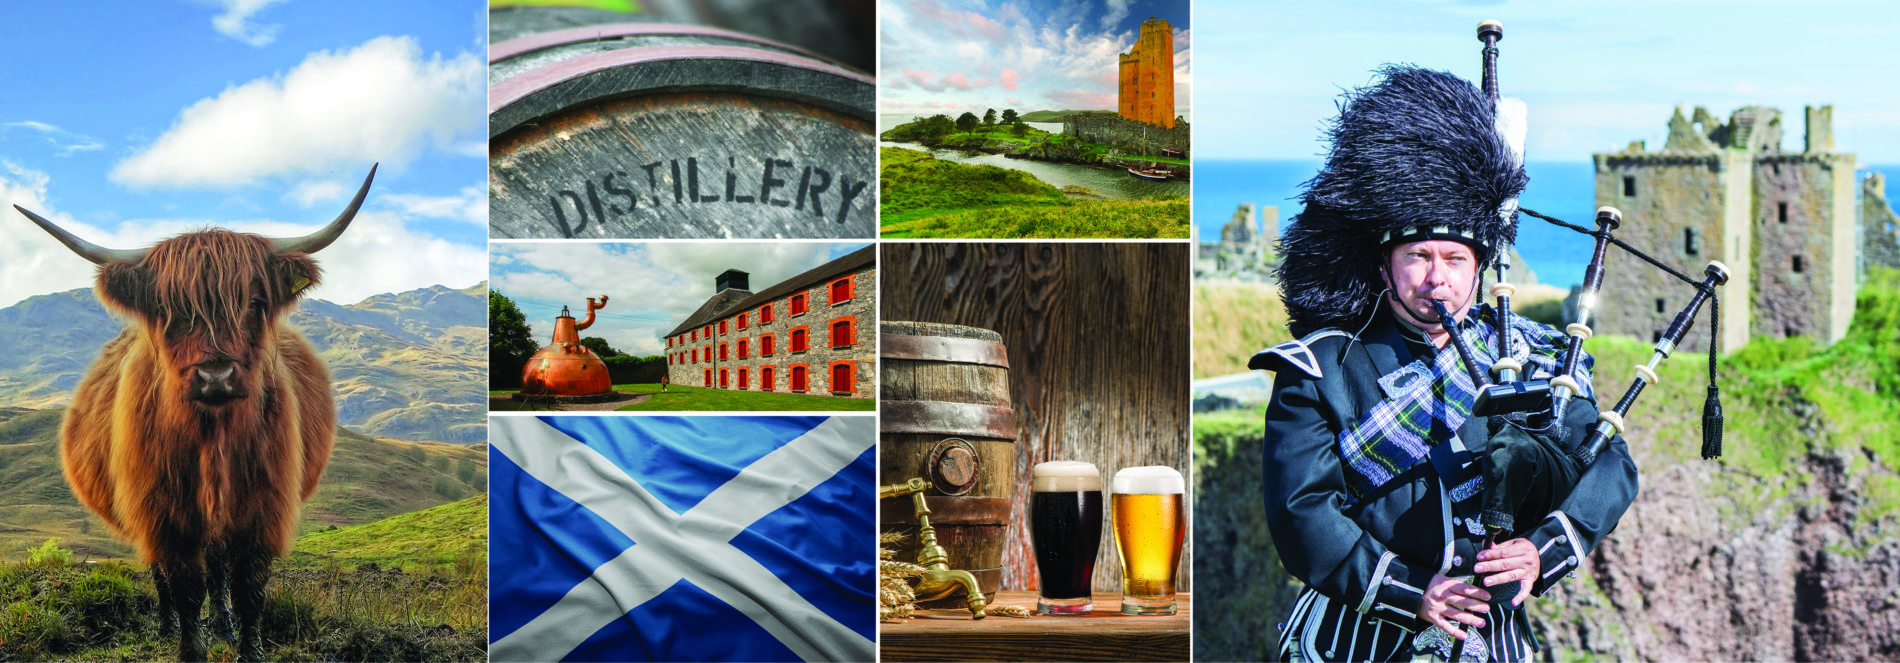 HopScotch - Beer and Whisky Tour of Scotland